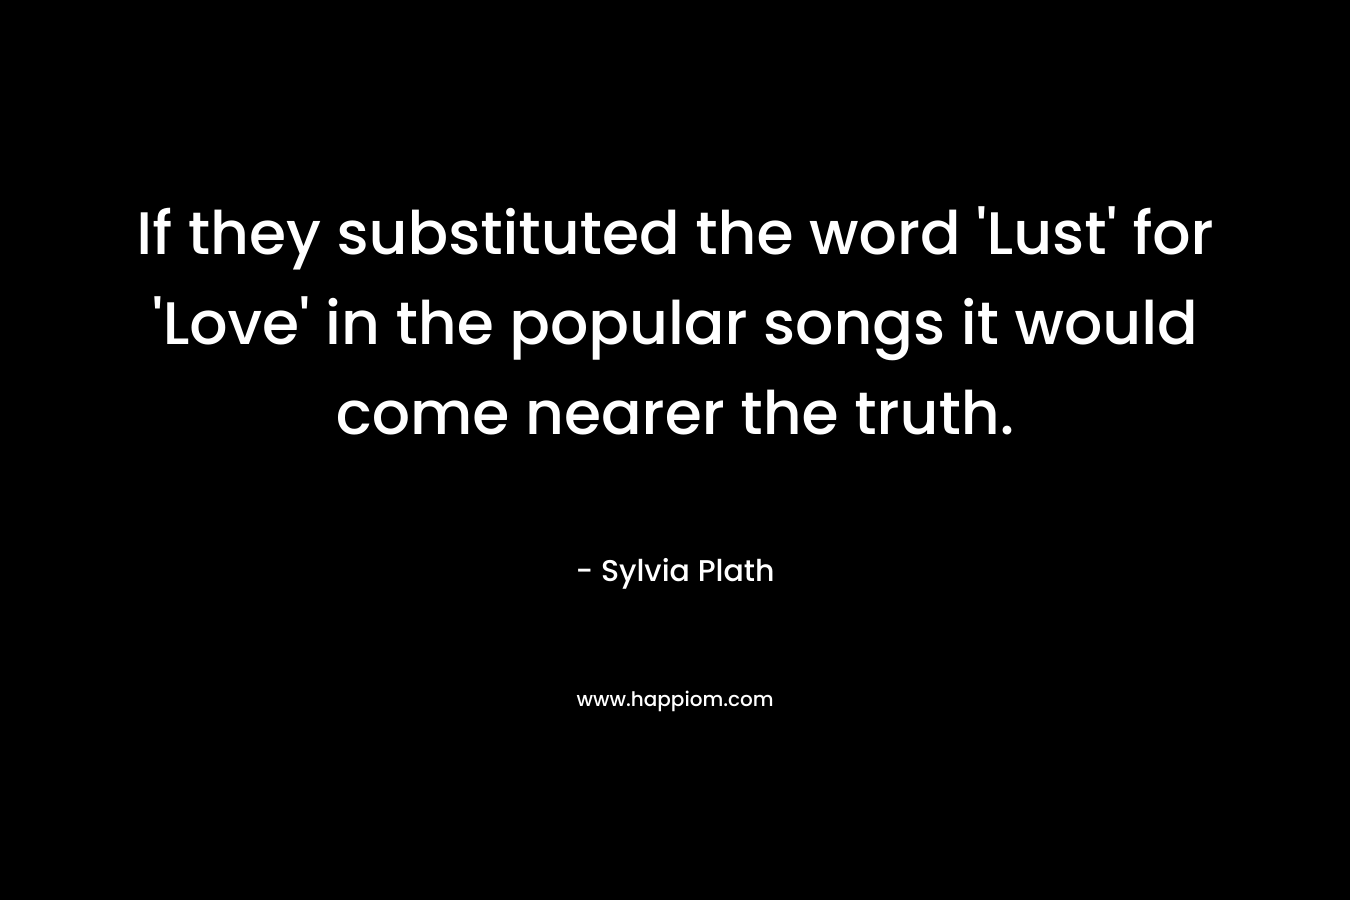 If they substituted the word ‘Lust’ for ‘Love’ in the popular songs it would come nearer the truth. – Sylvia Plath